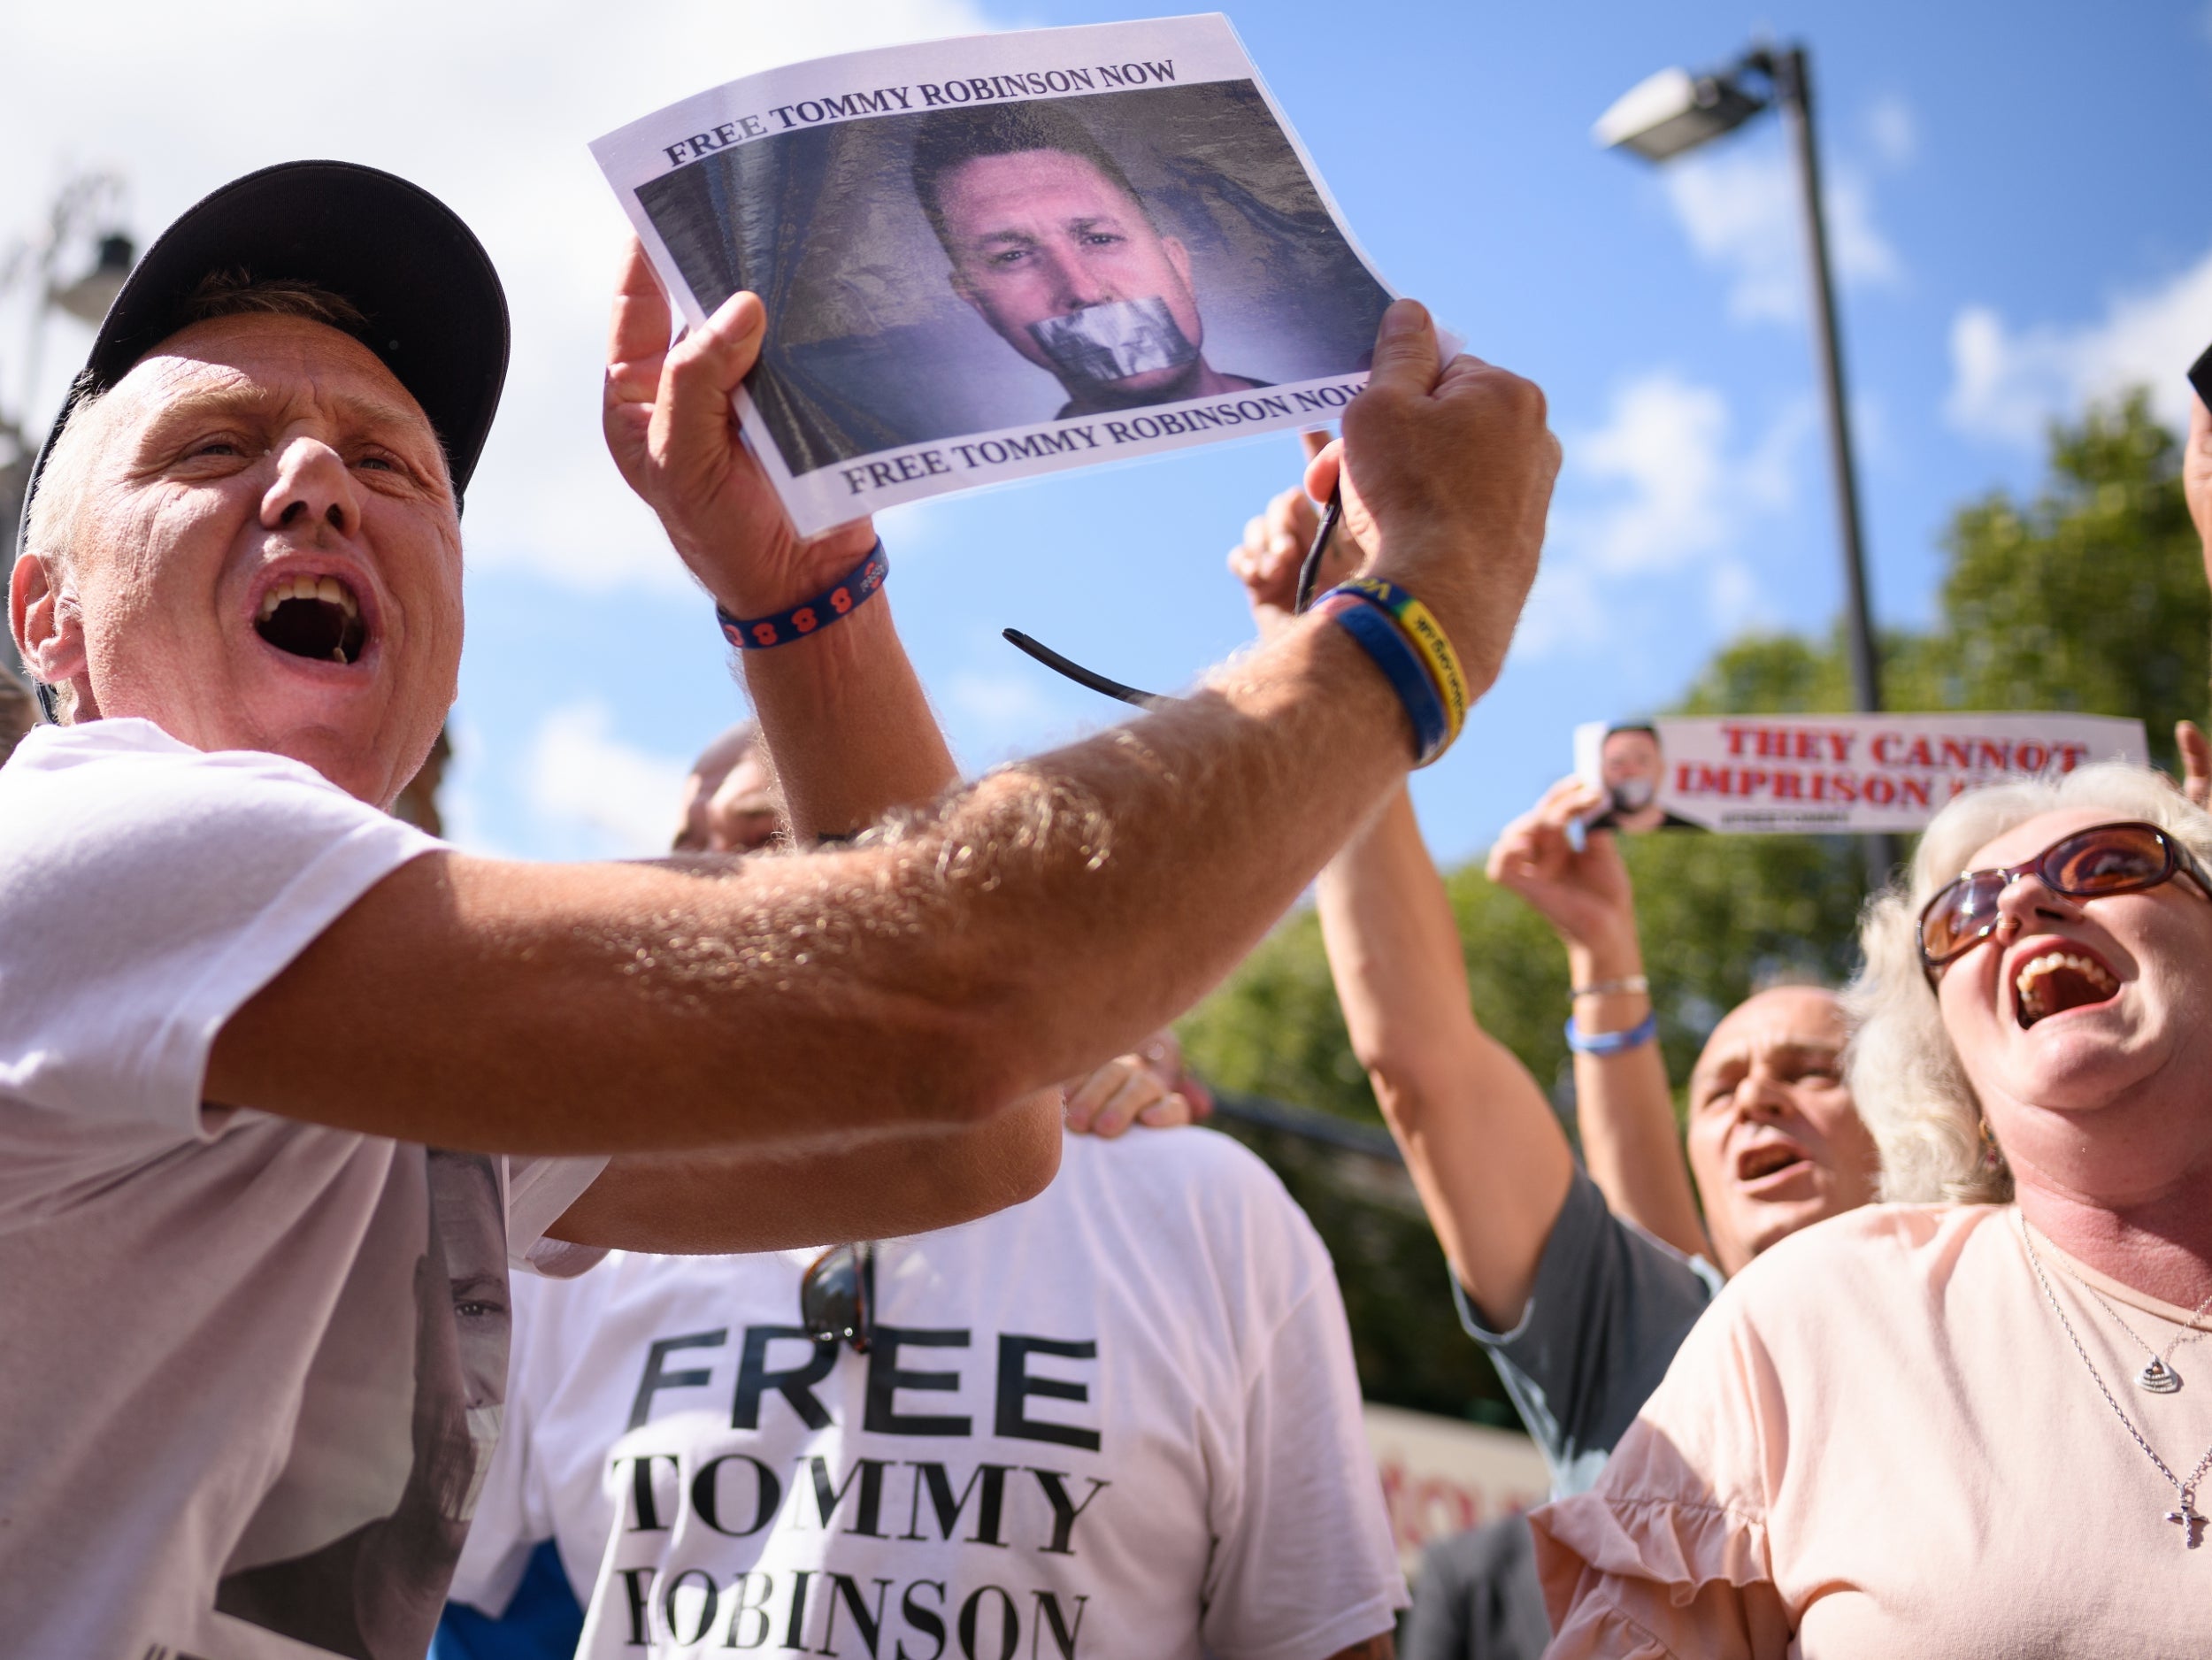 Tommy Robinson is richer and has more international support after two-month imprisonment, research shows